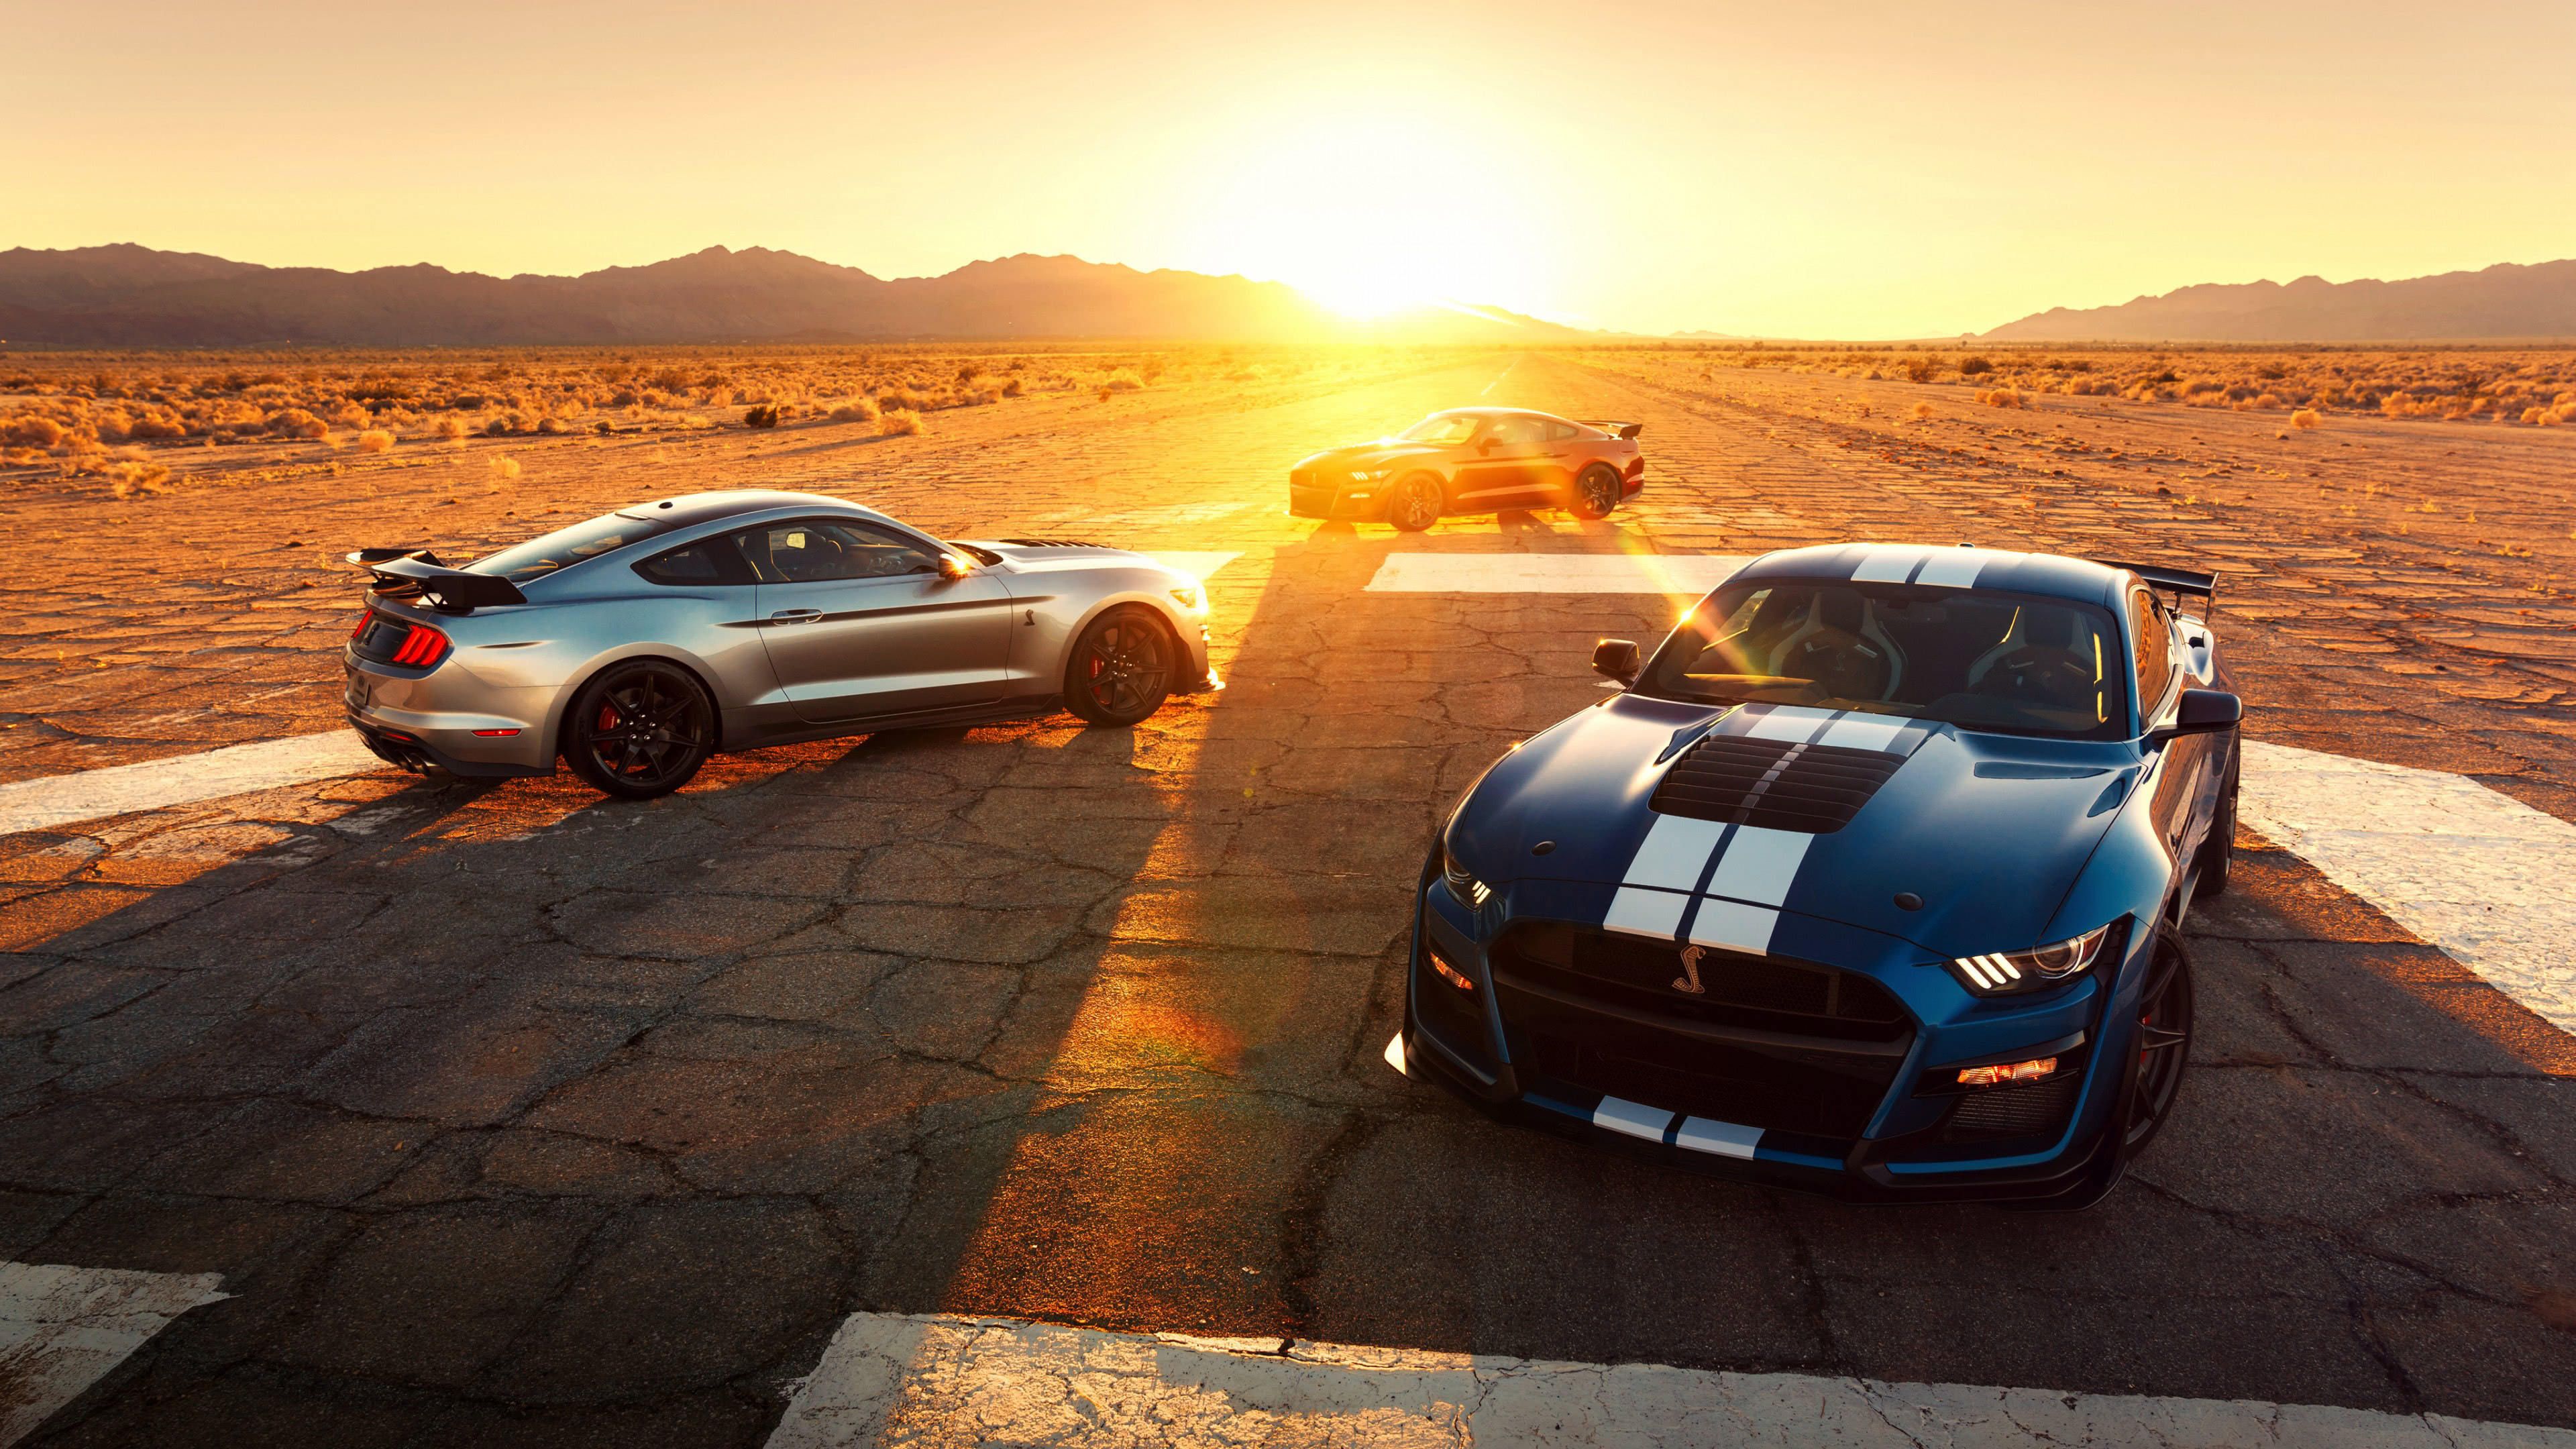 Shelby Gt K Wallpapers Wallpaper Cave